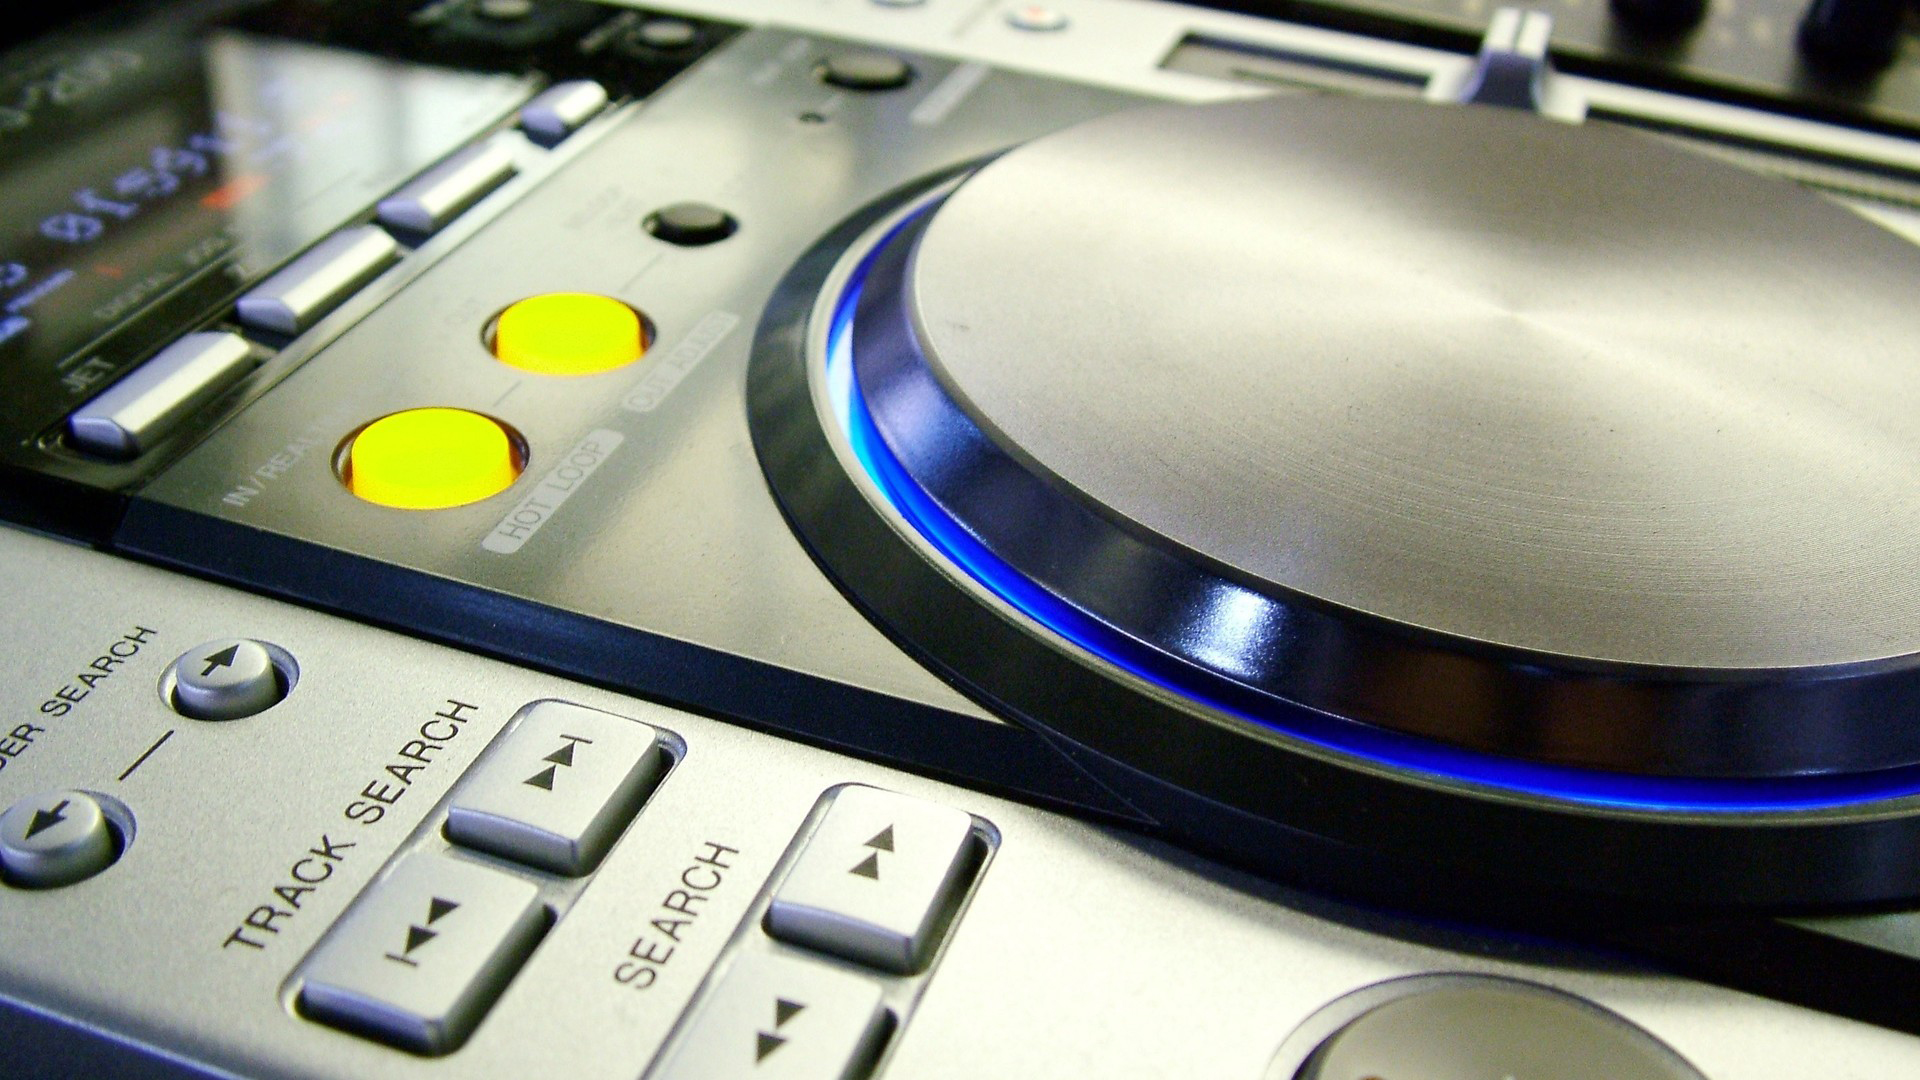 Wallpapers turntable remote control DJ on the desktop